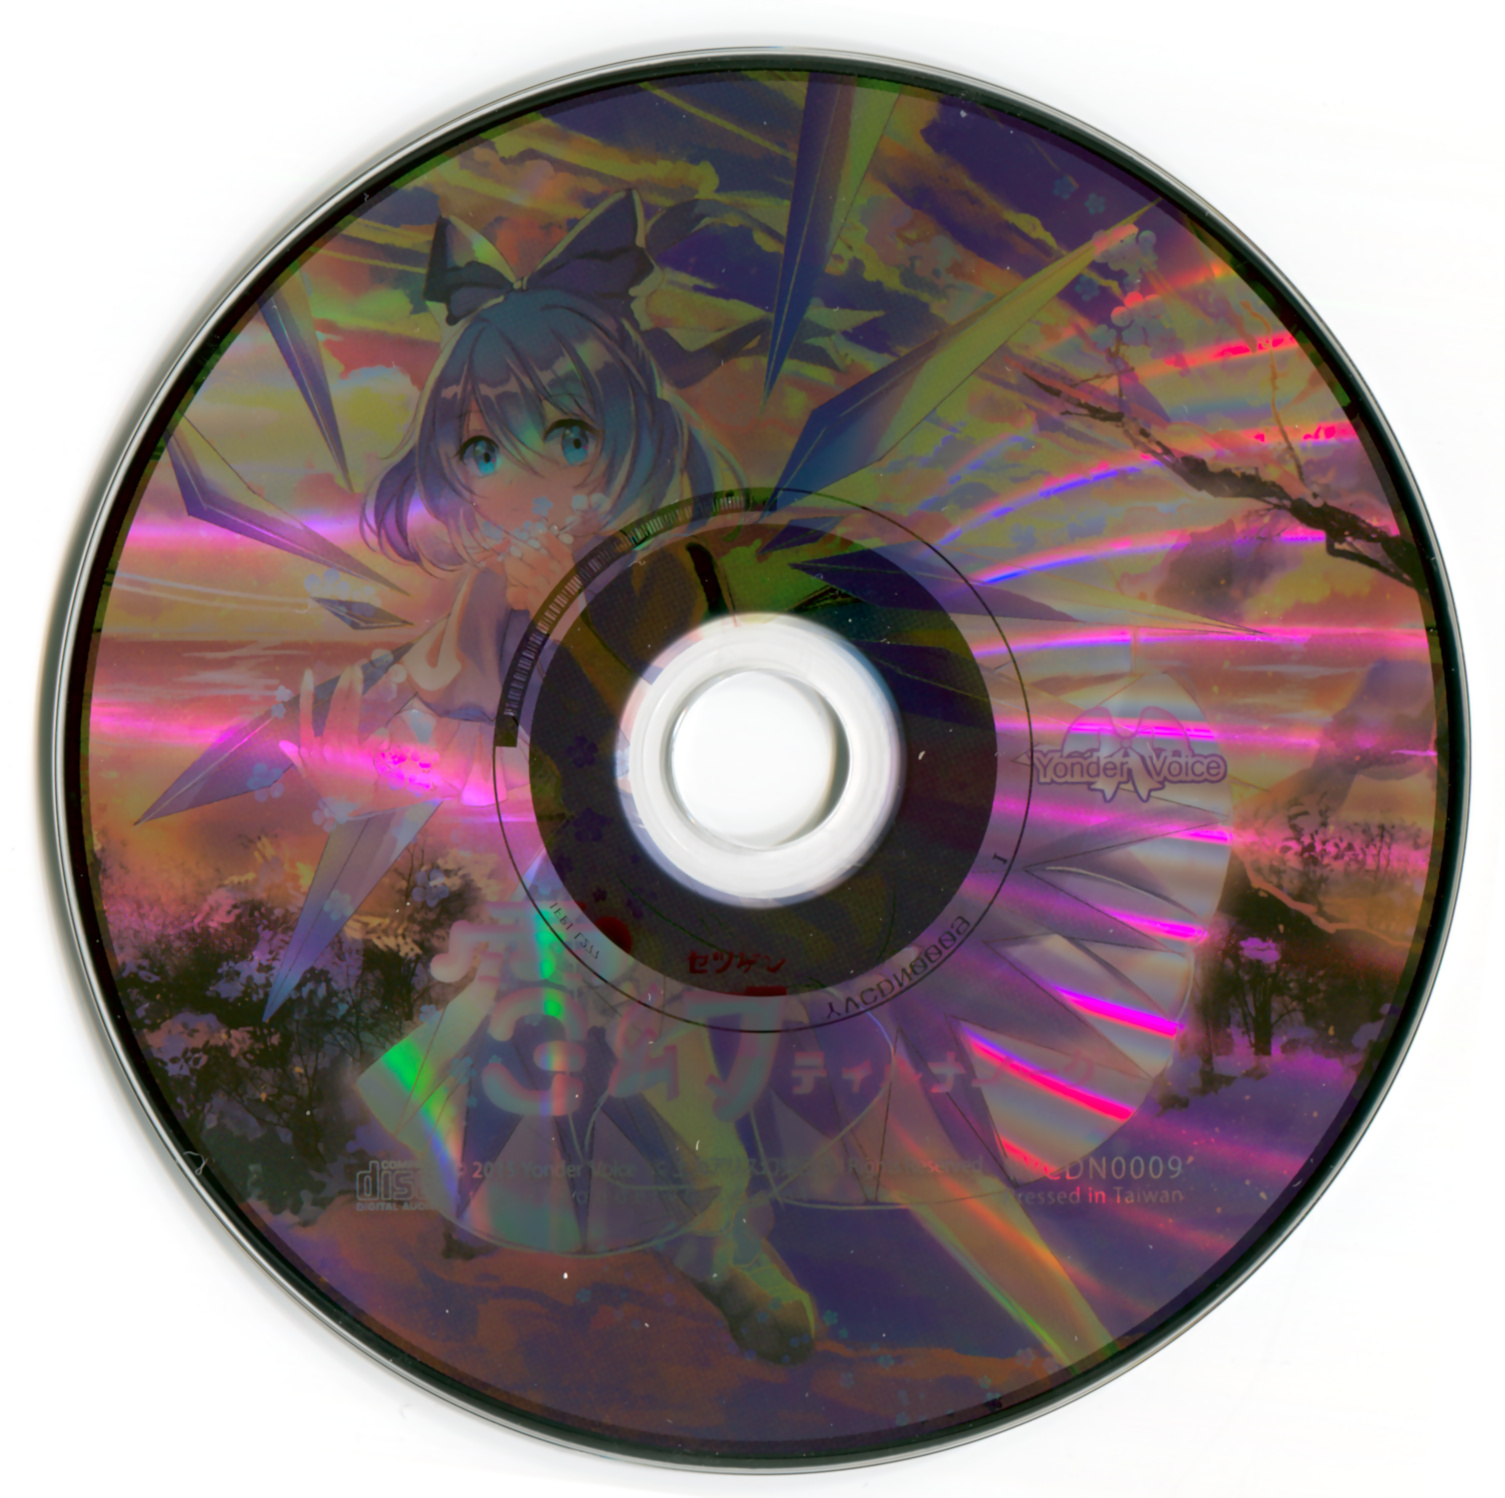 The printed image on the CD is dim, and a complex rainbow pattern is visible mixed with the image.